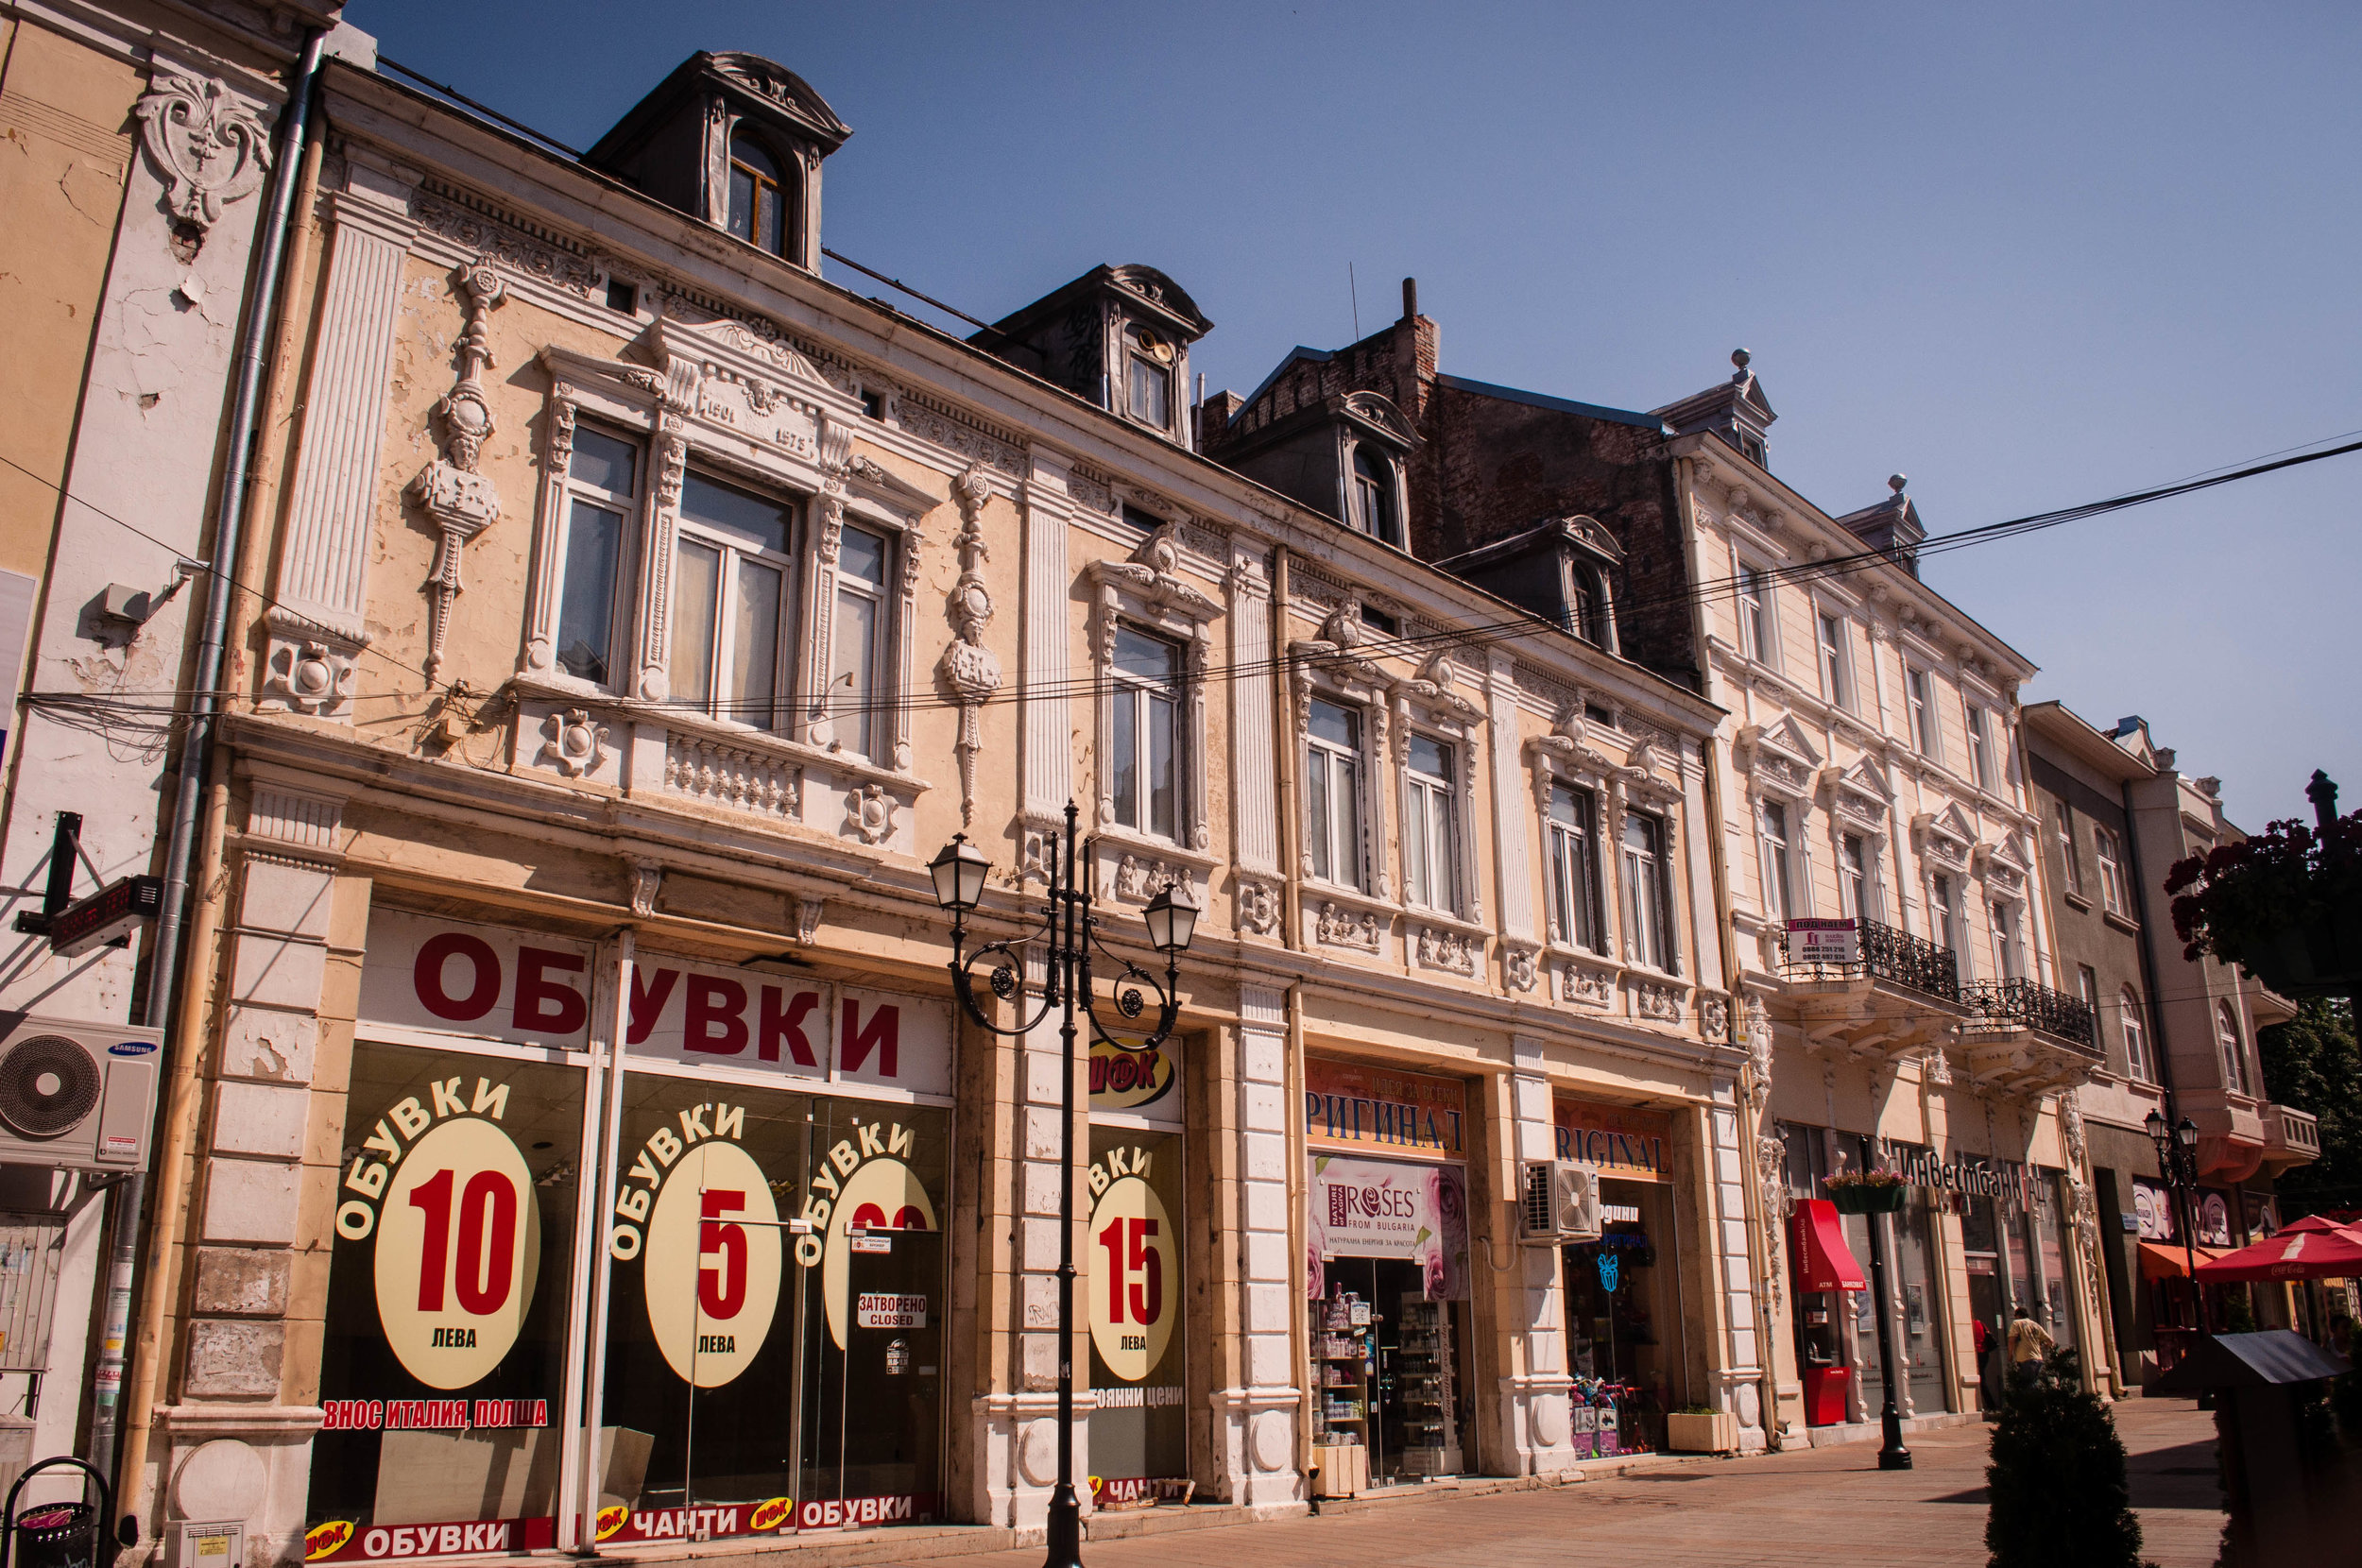 Ruse buildings with the baroque architecture style. This is a stop in our road trip Bulgaria